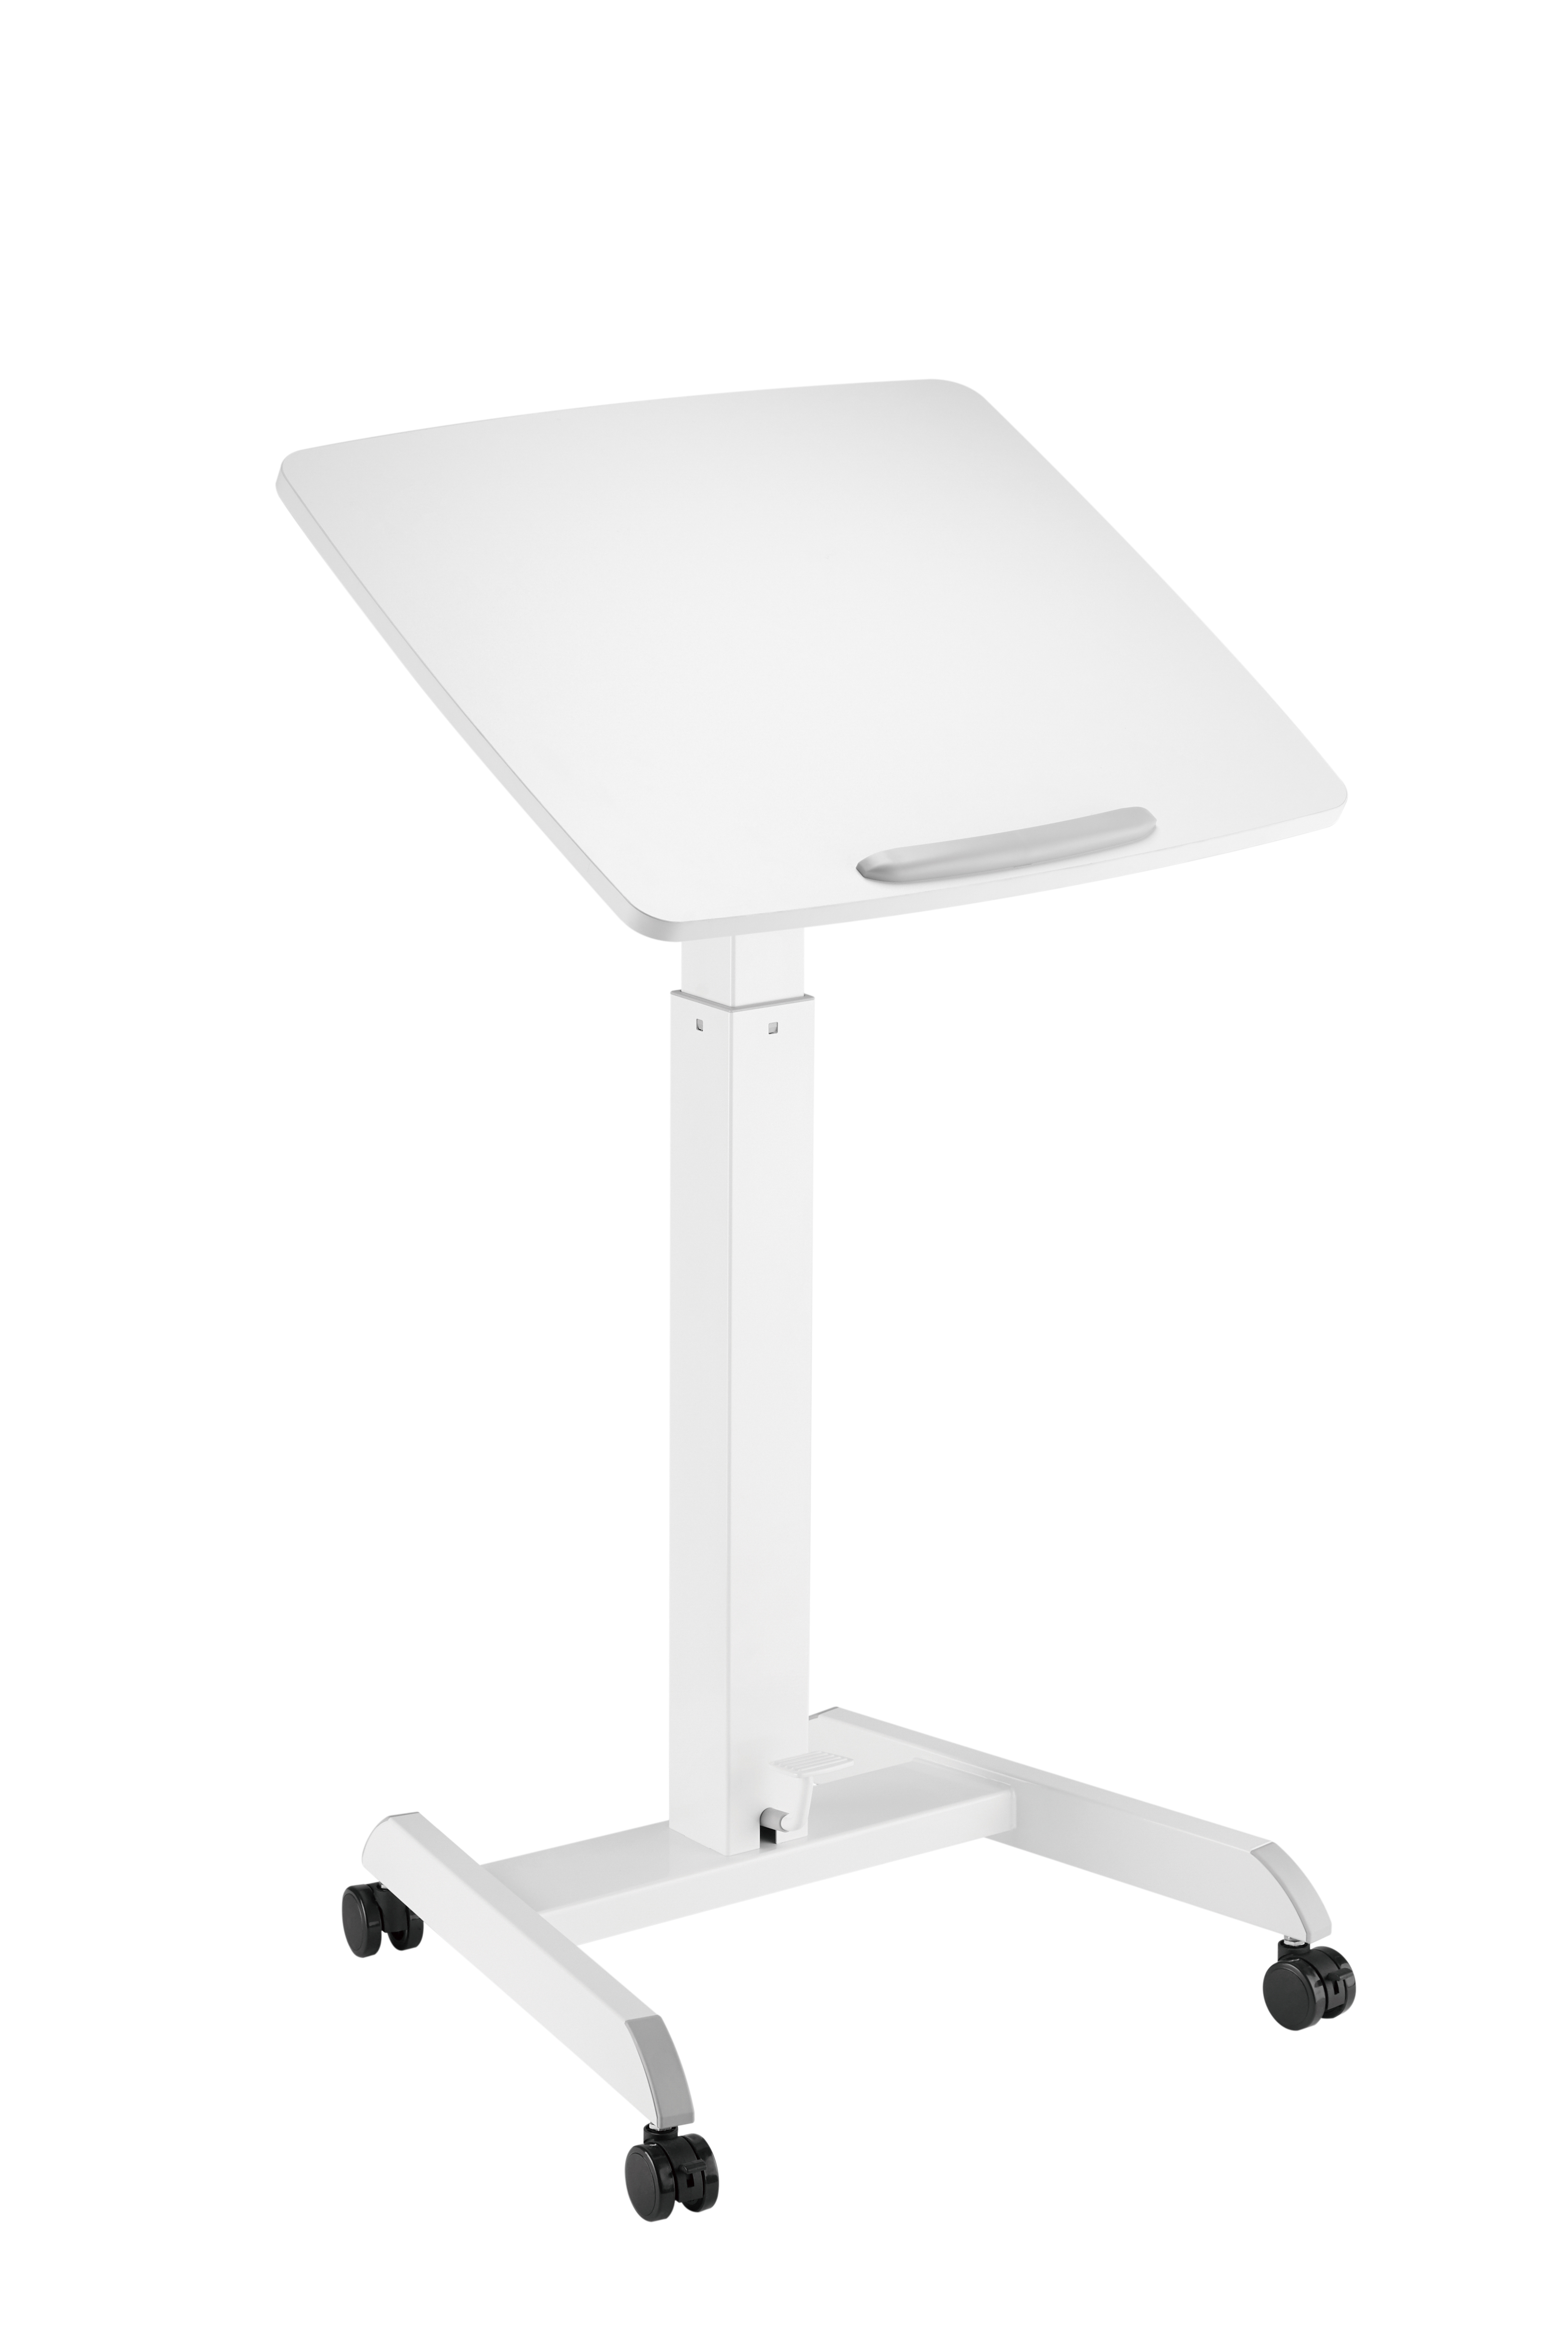 ICY BOX Mobile presentation table IB-MW201W-M for Notebook/Pad white